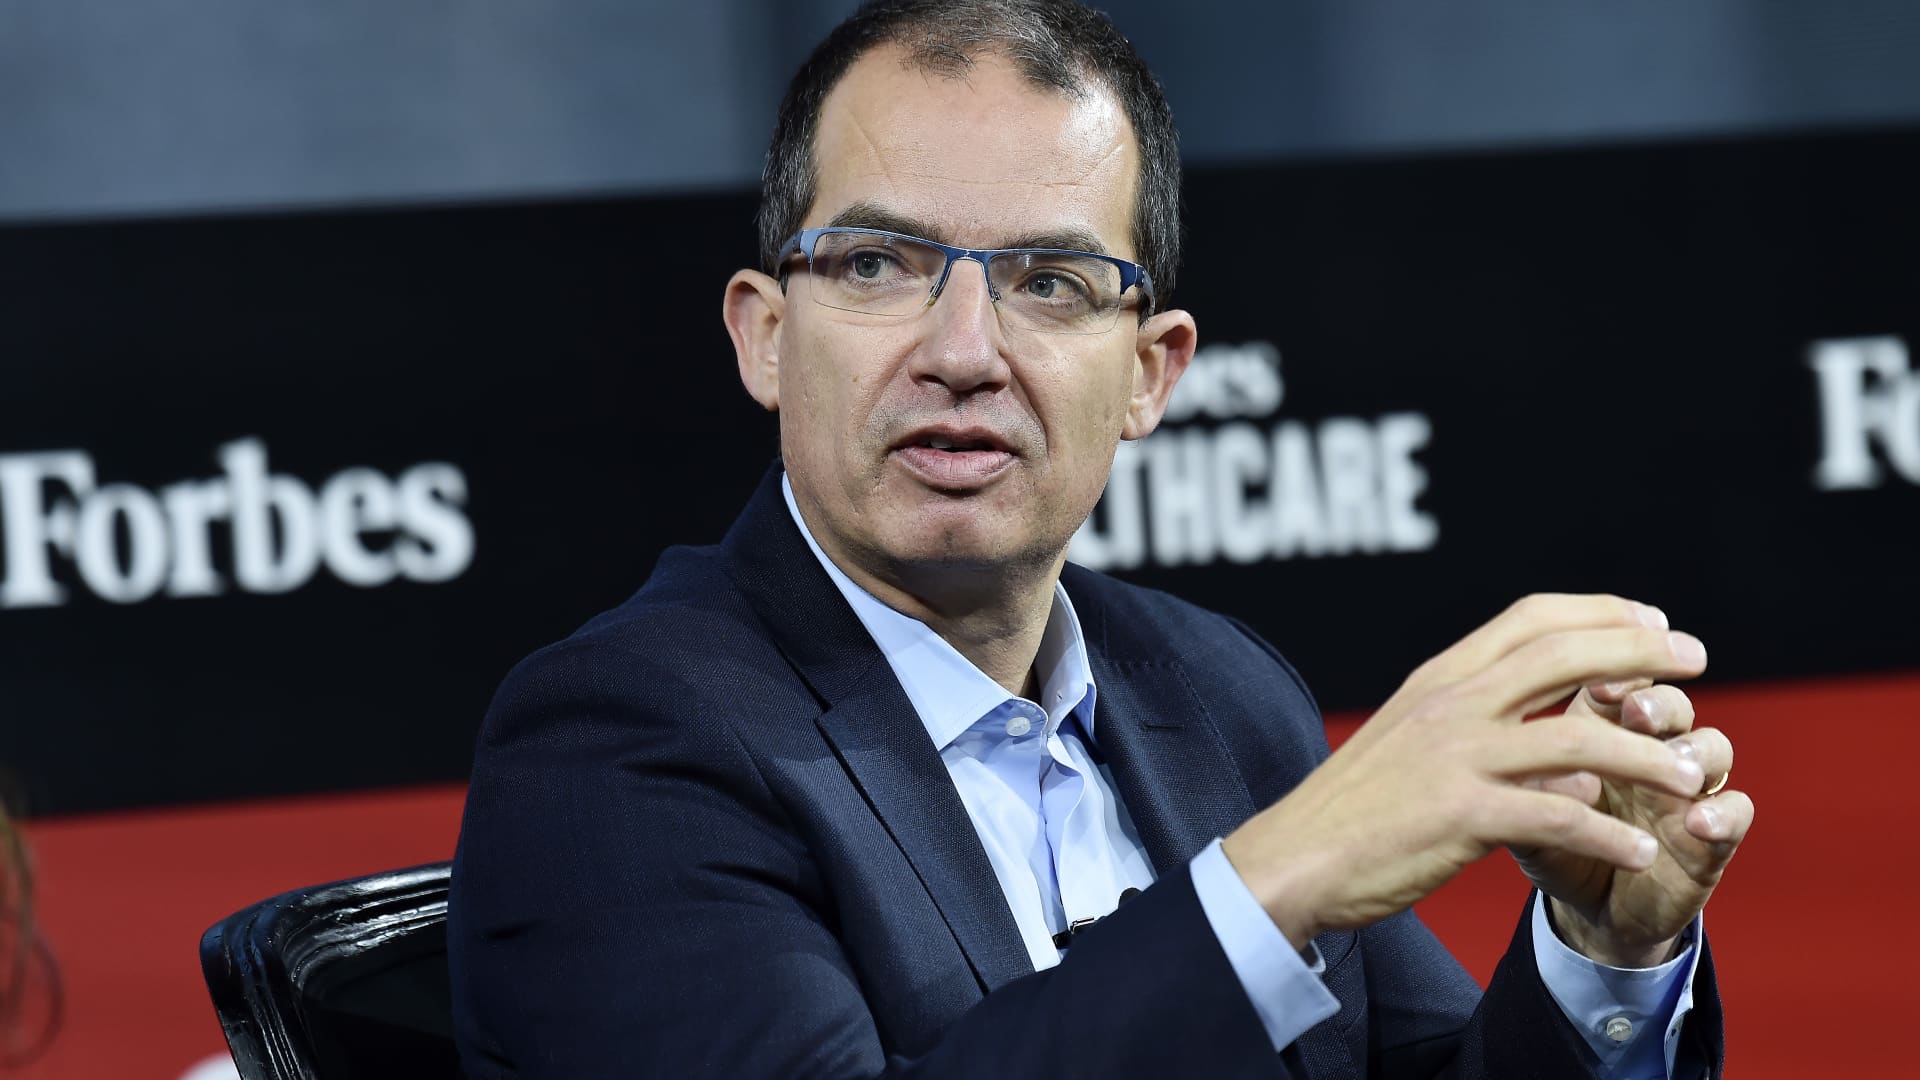 Moderna CEO Stephane Bancel has sold more than 0 million of company stock during the pandemic